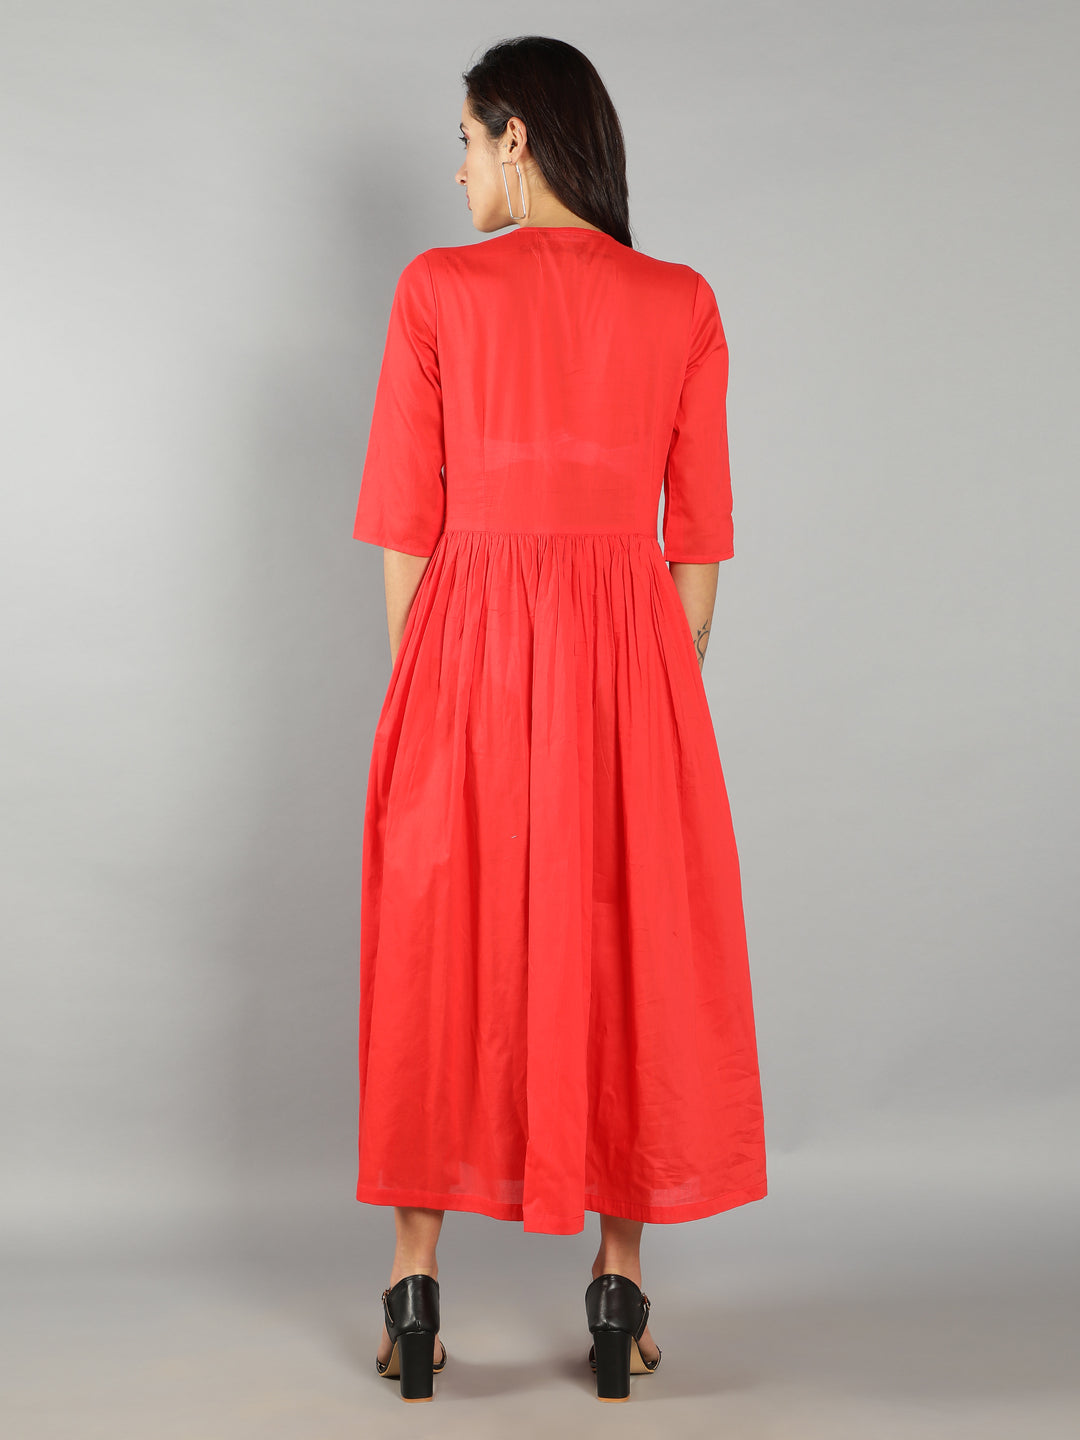 See Designs Red A-Line Women Dress